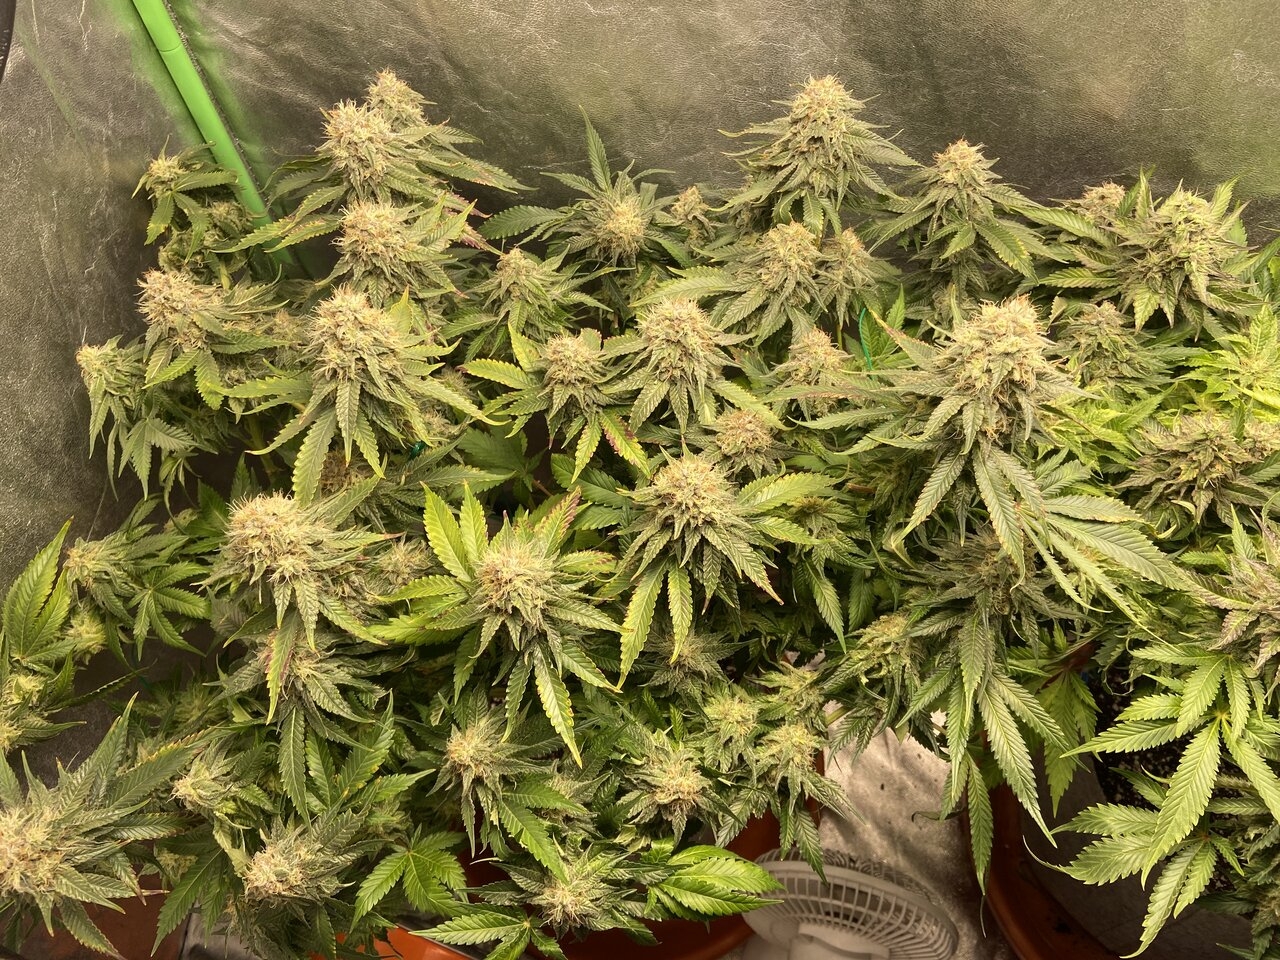 Chemdawg #4. A bit over 5 weeks. Stunted plant.